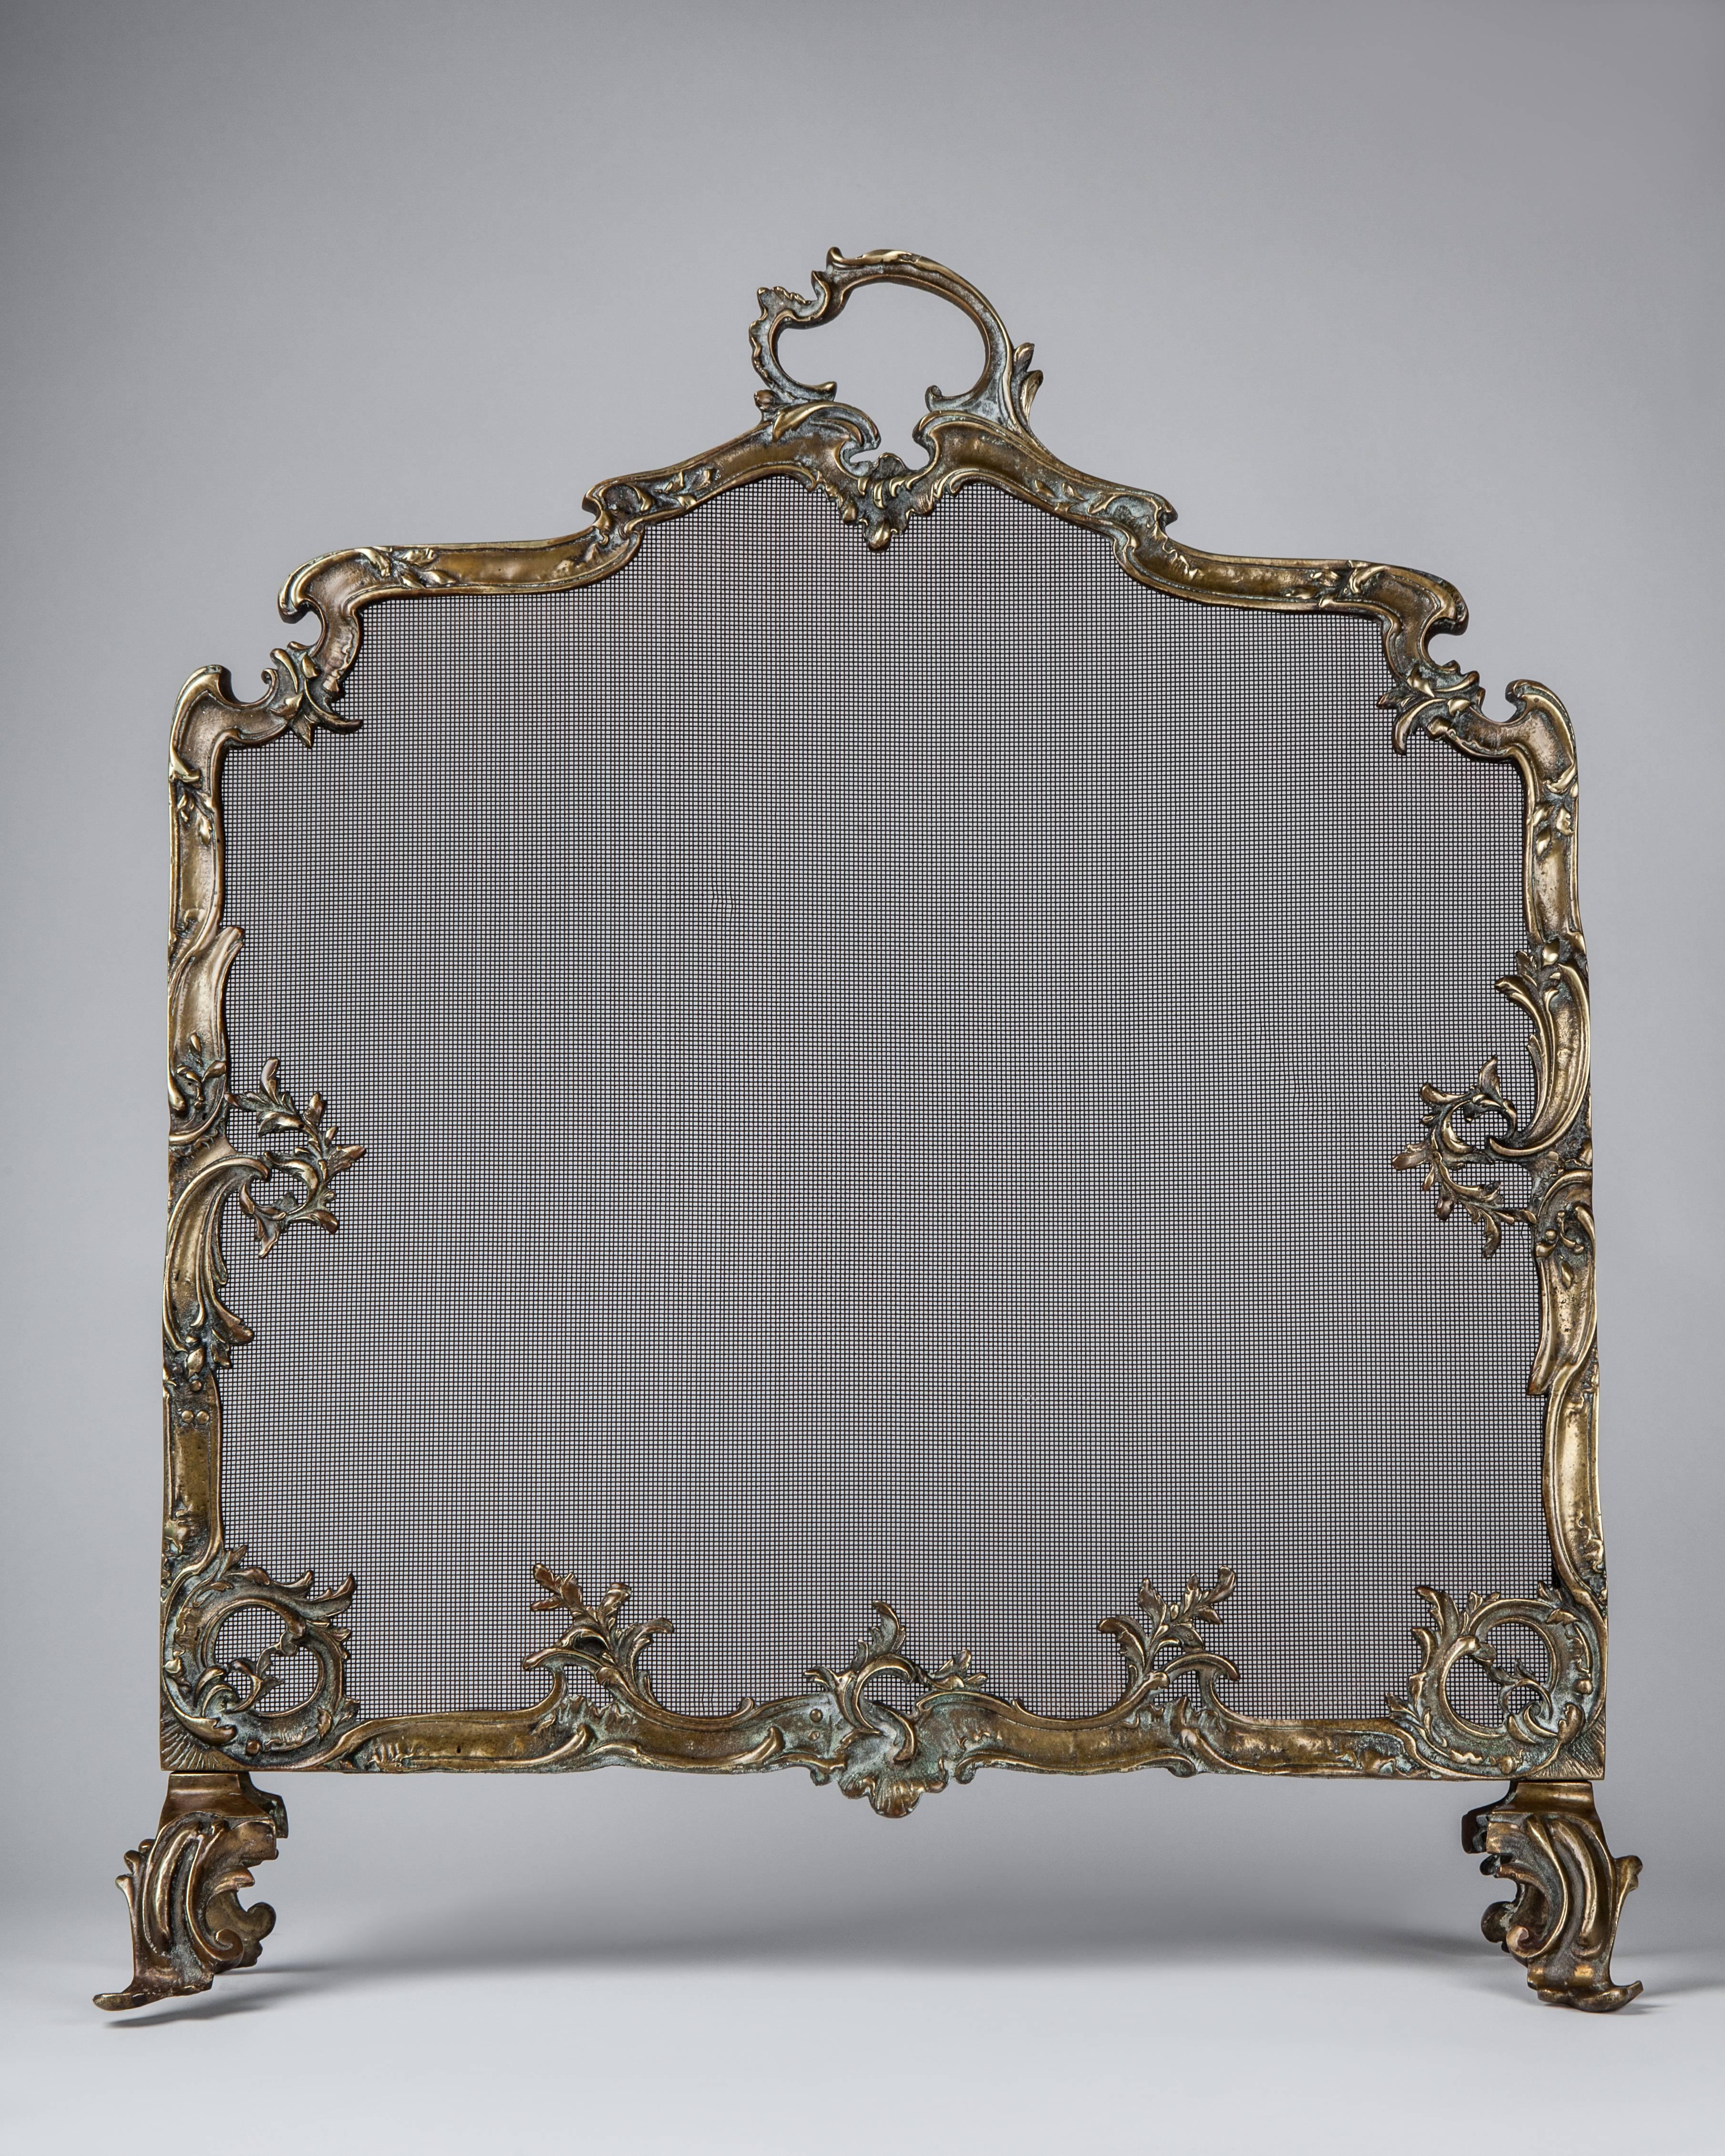 AFP0530
An antique bronze Louis XV fireplace screen with iron mesh.

Dimensions:
Overall: 31-1/2